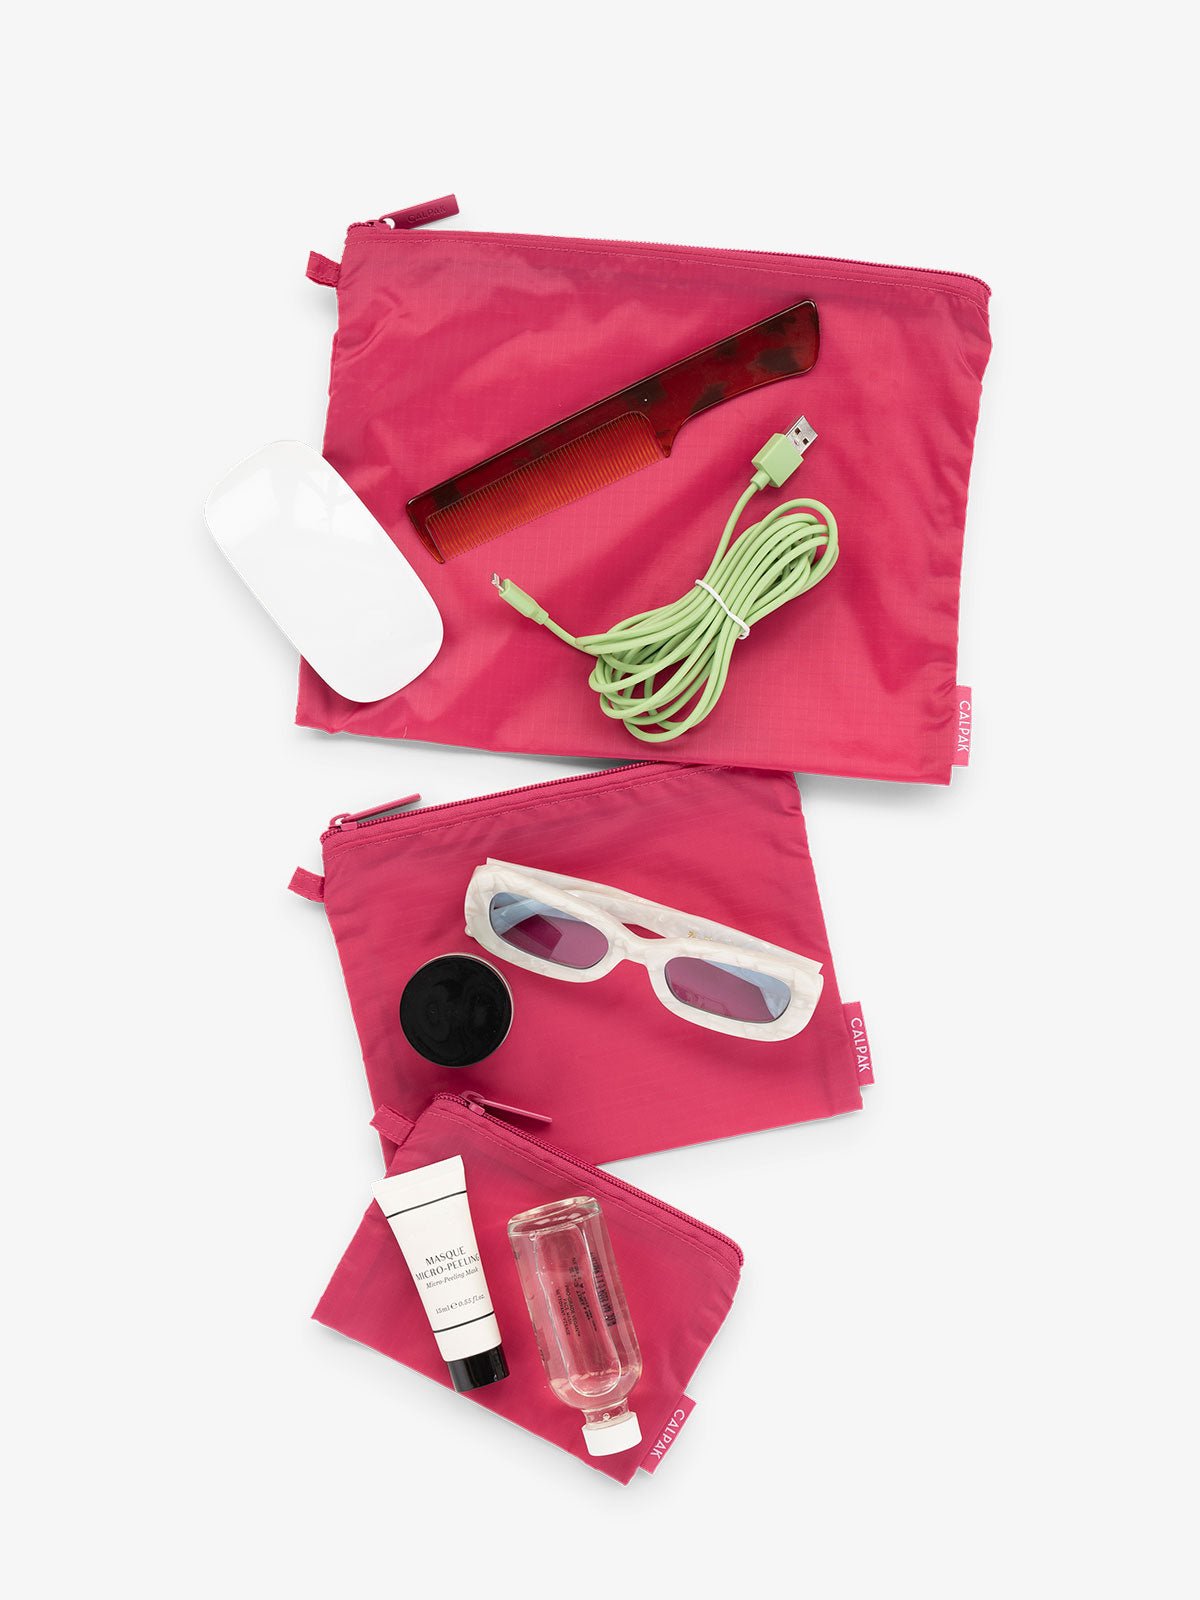 CALPAK Compakt 3 piece zippered pouch set in 3 sizes with water resistant material in dragonfruit pink